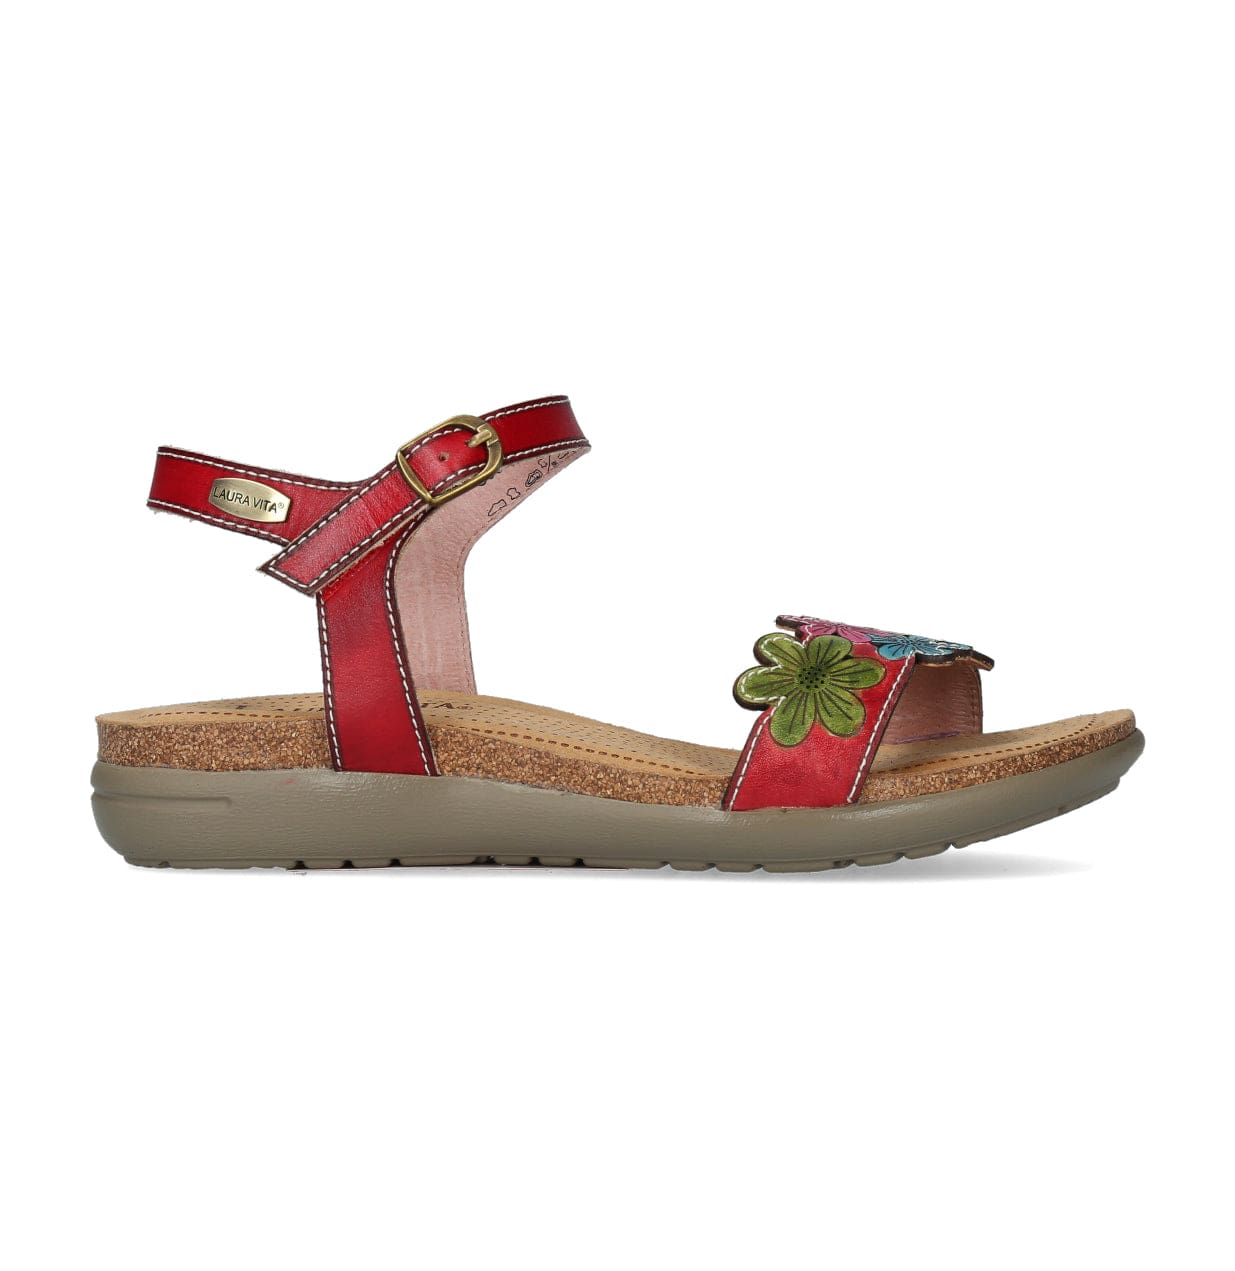 LILOO 10 shoes - 35 / Red - Sandal